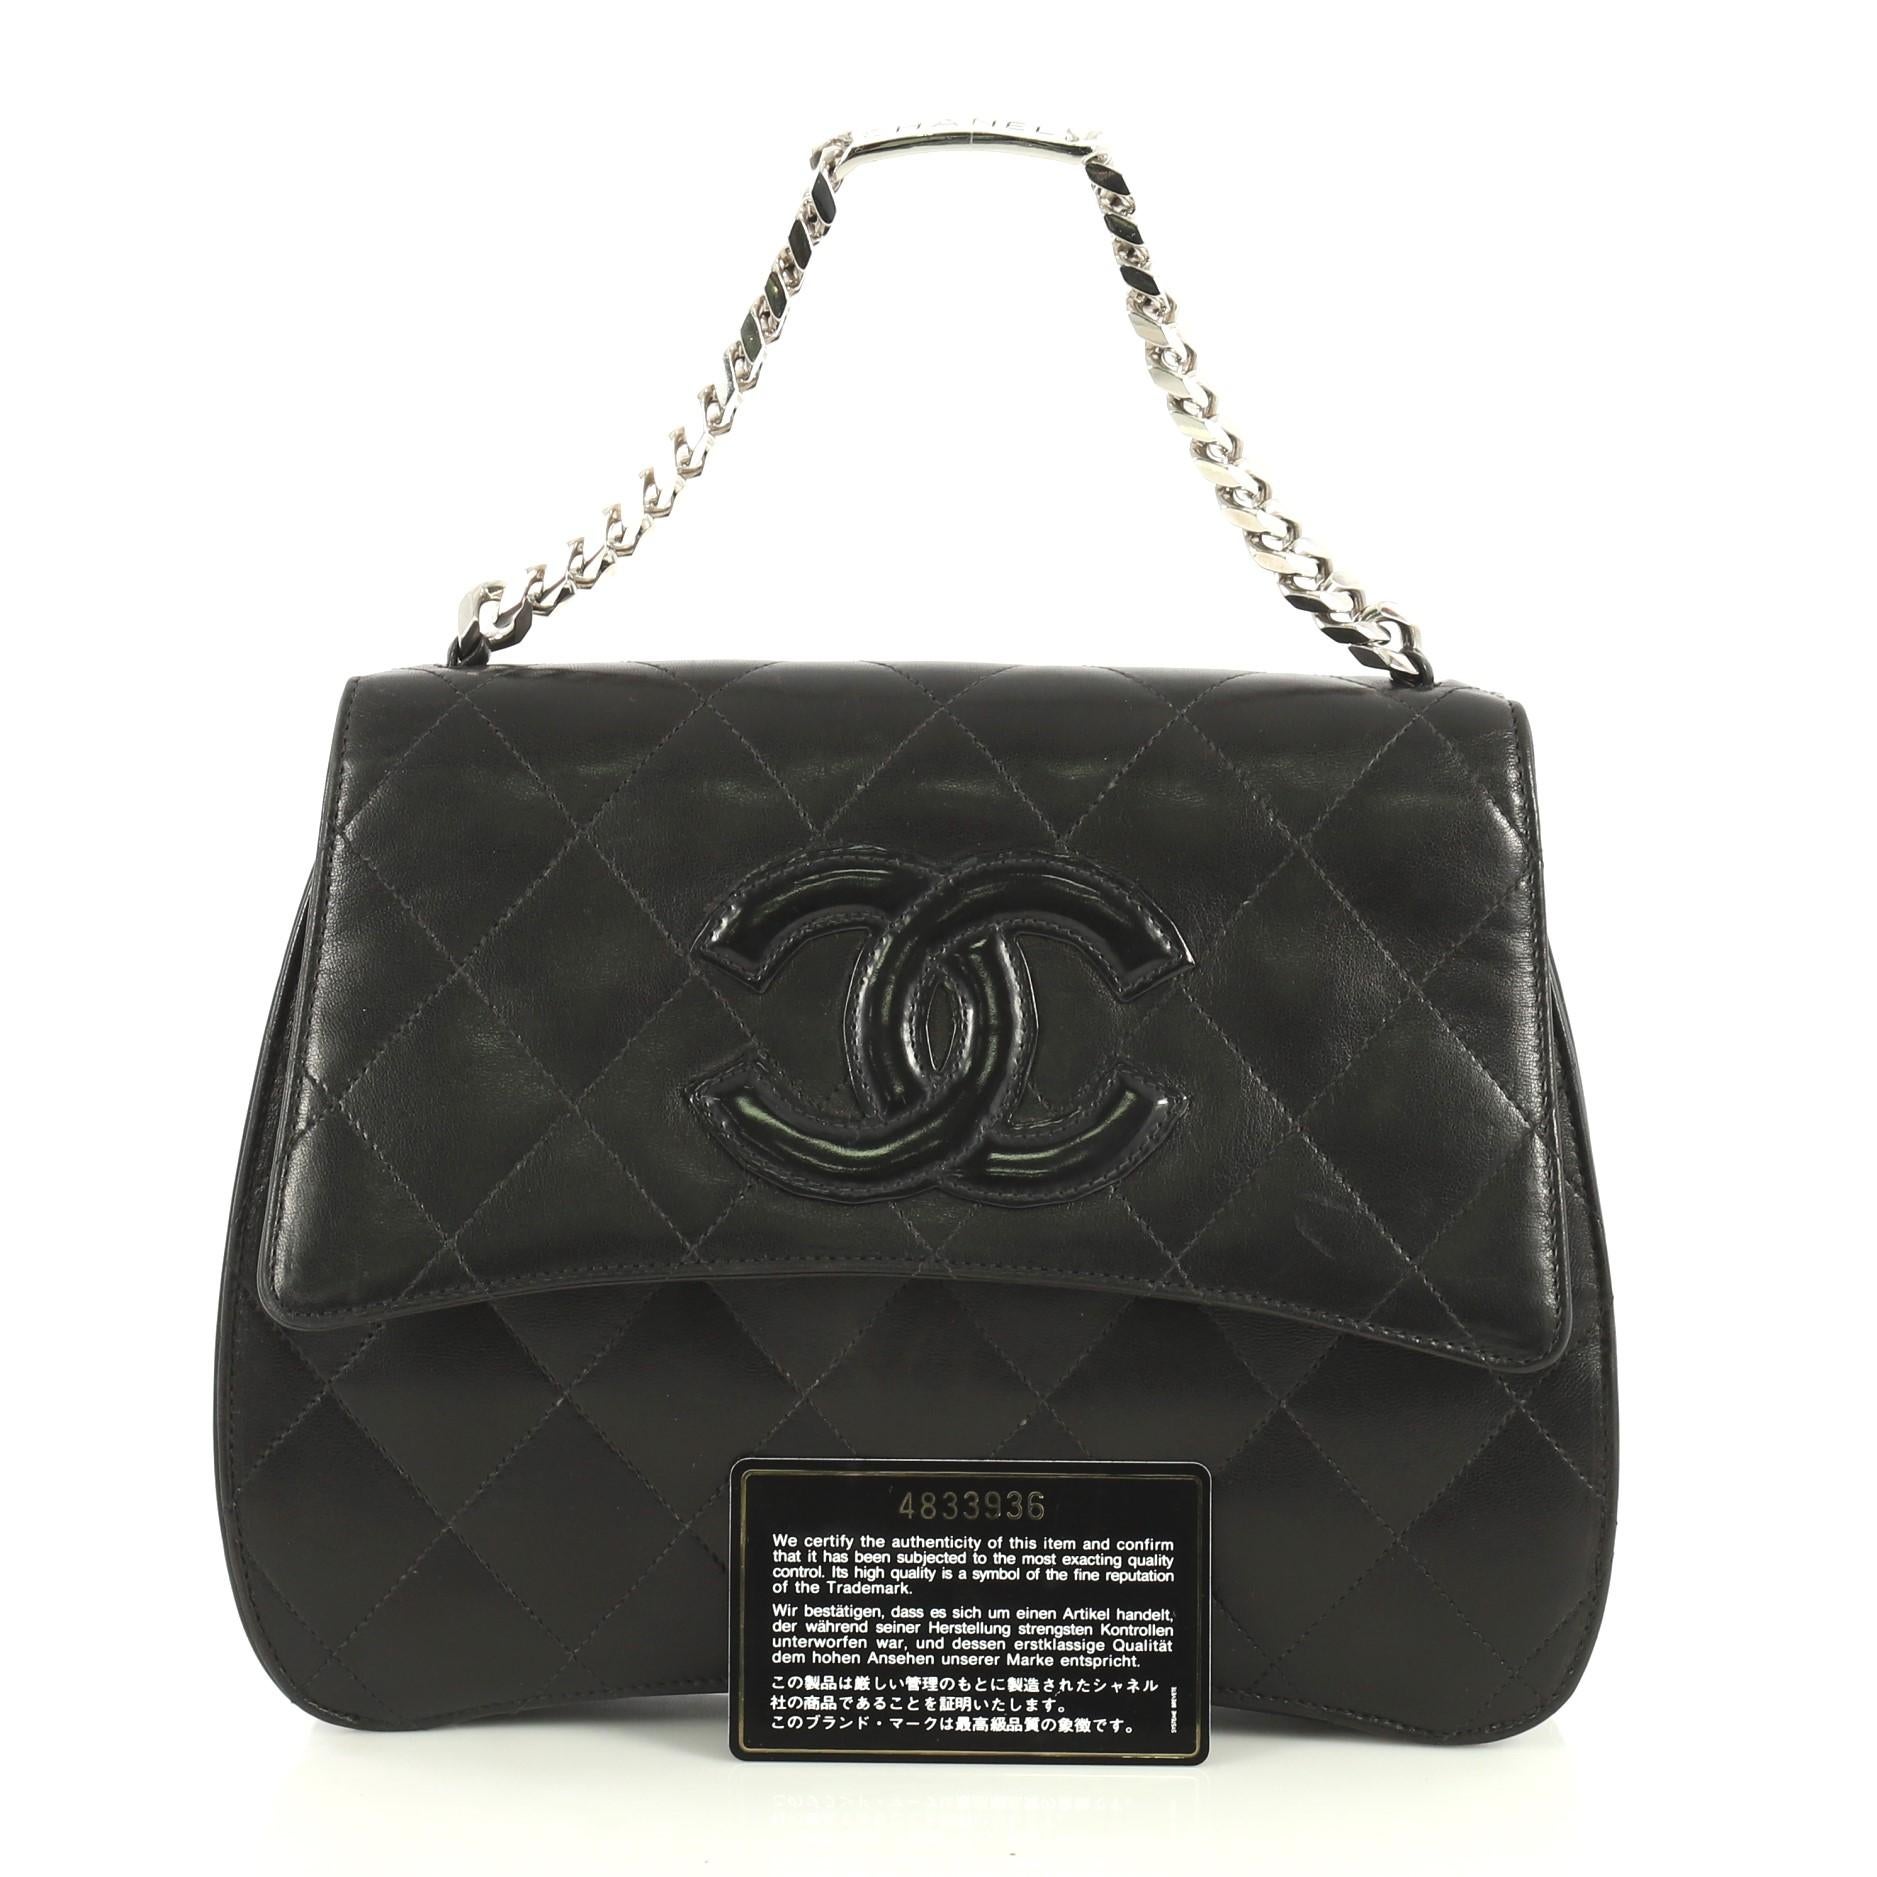 This Chanel Vintage ID Bracelet Bag Quilted Lambskin Medium, crafted from black quilted lambskin leather, features chain link handle and silver-tone hardware. Its flap with snap closure opens to a red leather interior with zip and slip pockets.